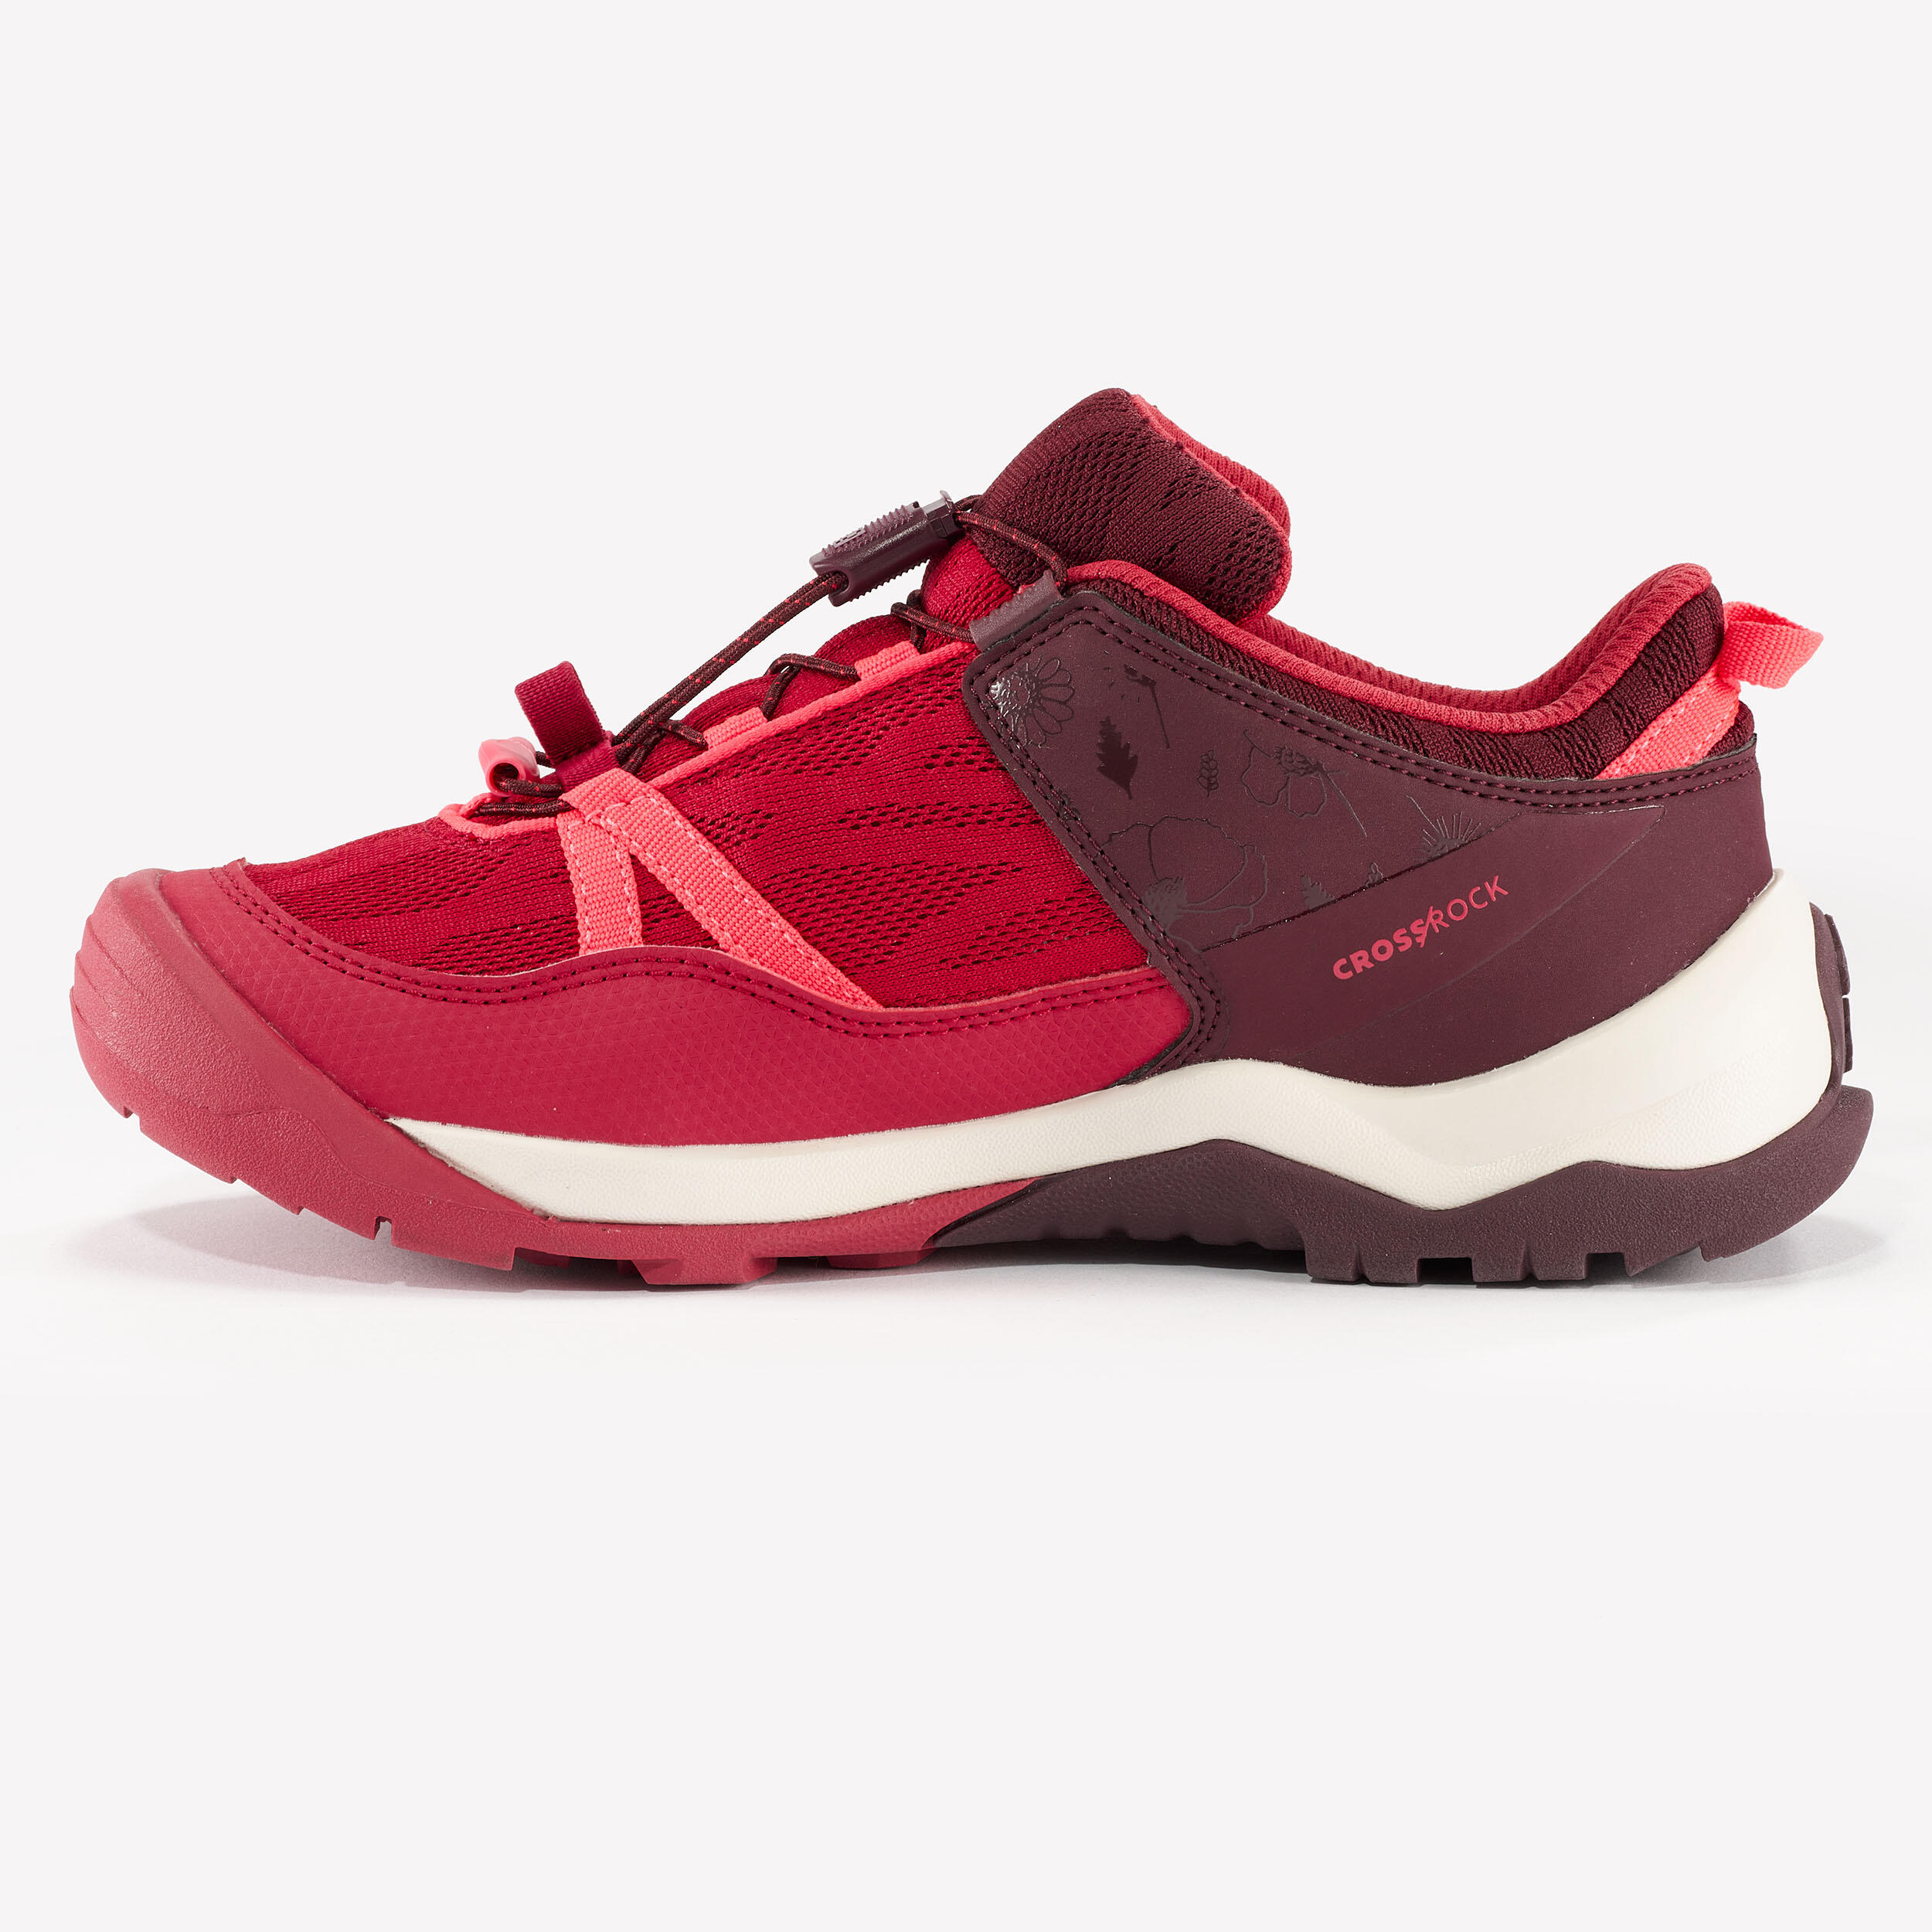 Kids’ Quick Lacing Hiking Shoes - Burgundy - ruby red, Dark chocolate ...